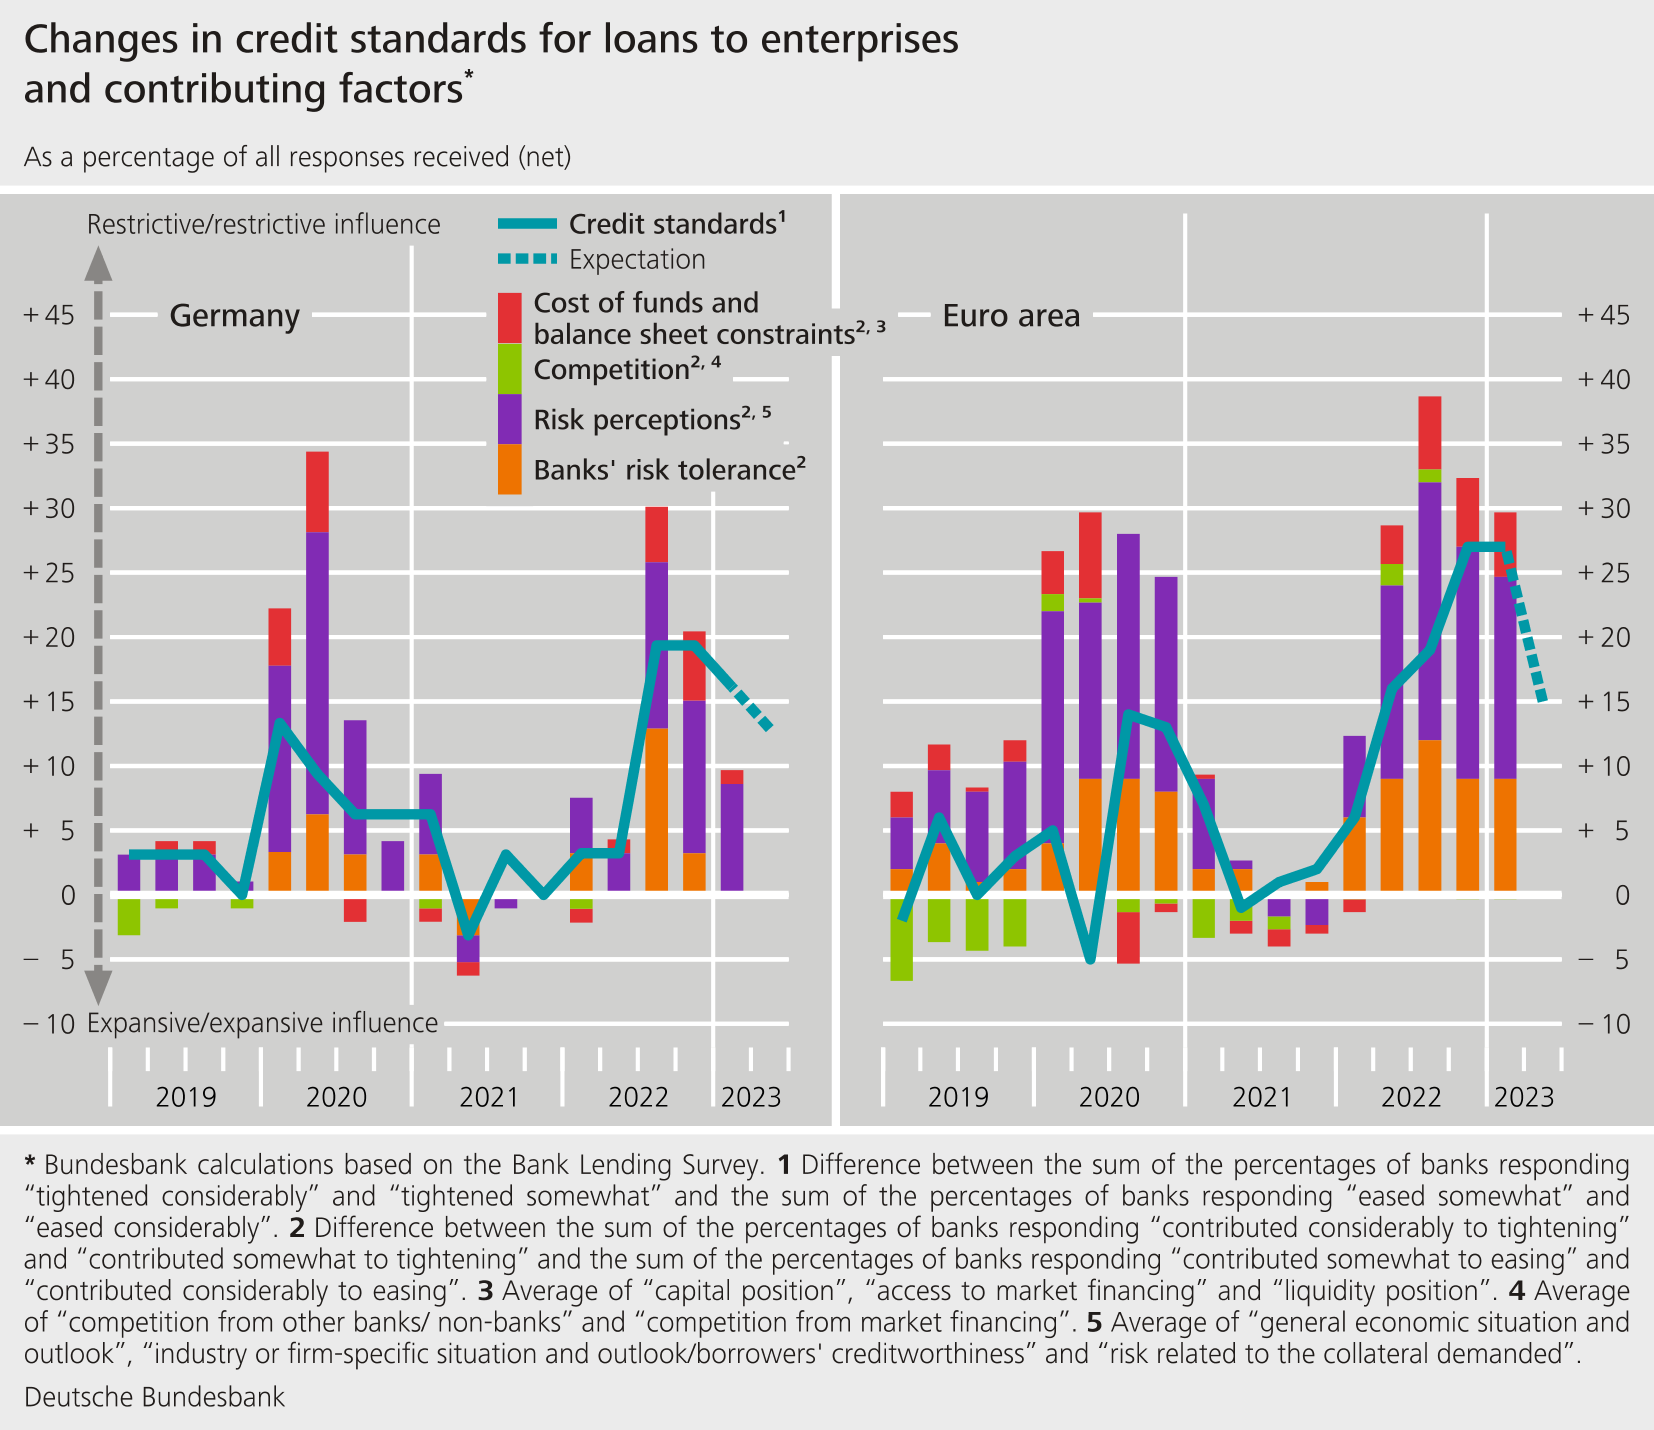 Change in credit standards for loans to enterprises and contributing factors